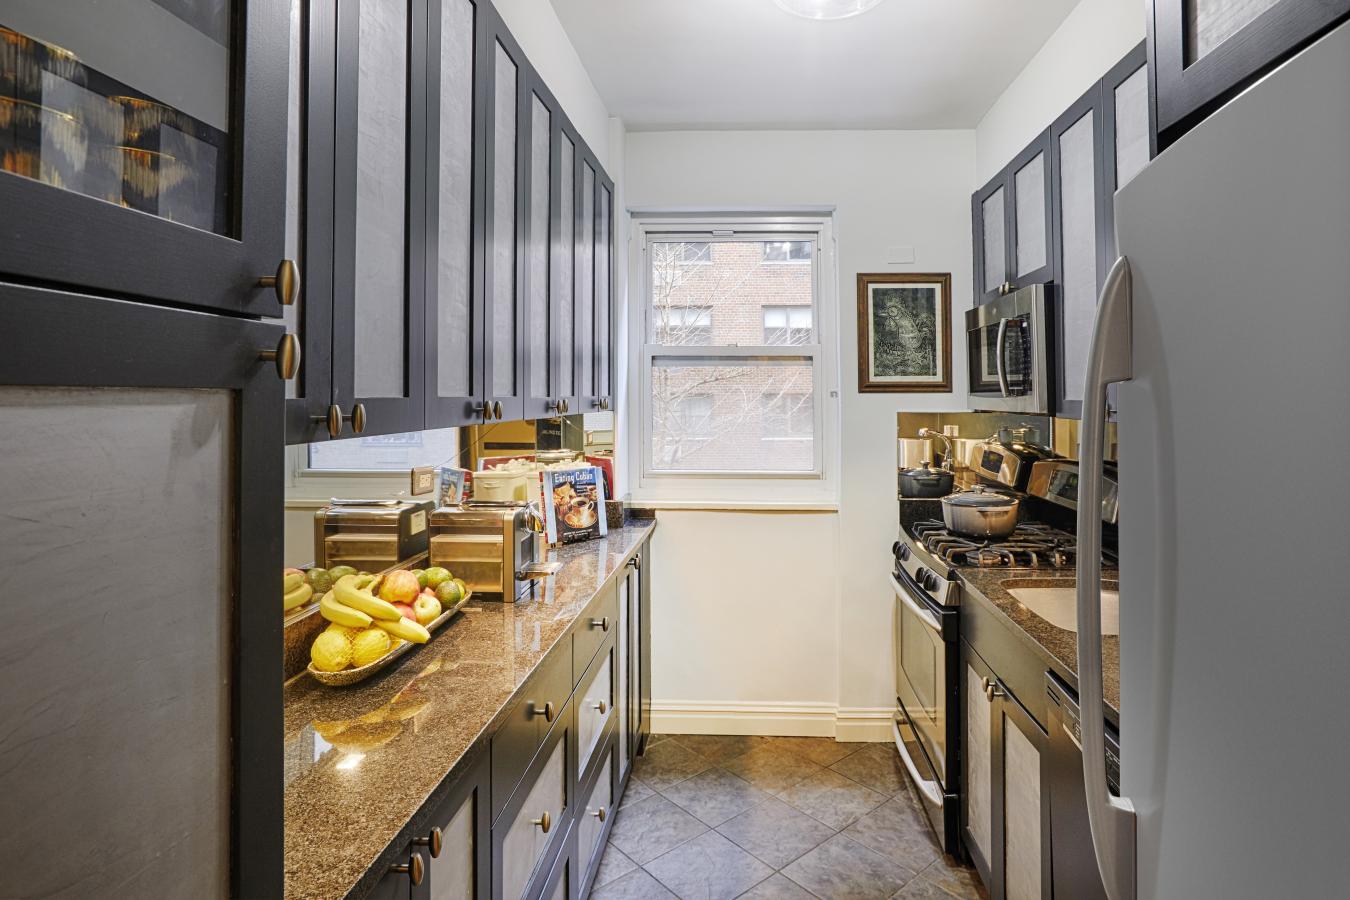 177 EAST 77TH STREET, New York, New York, 10075, United States, 2 Bedrooms Bedrooms, ,1 BathroomBathrooms,Residential,For Sale,177 east 77th ST,1465410